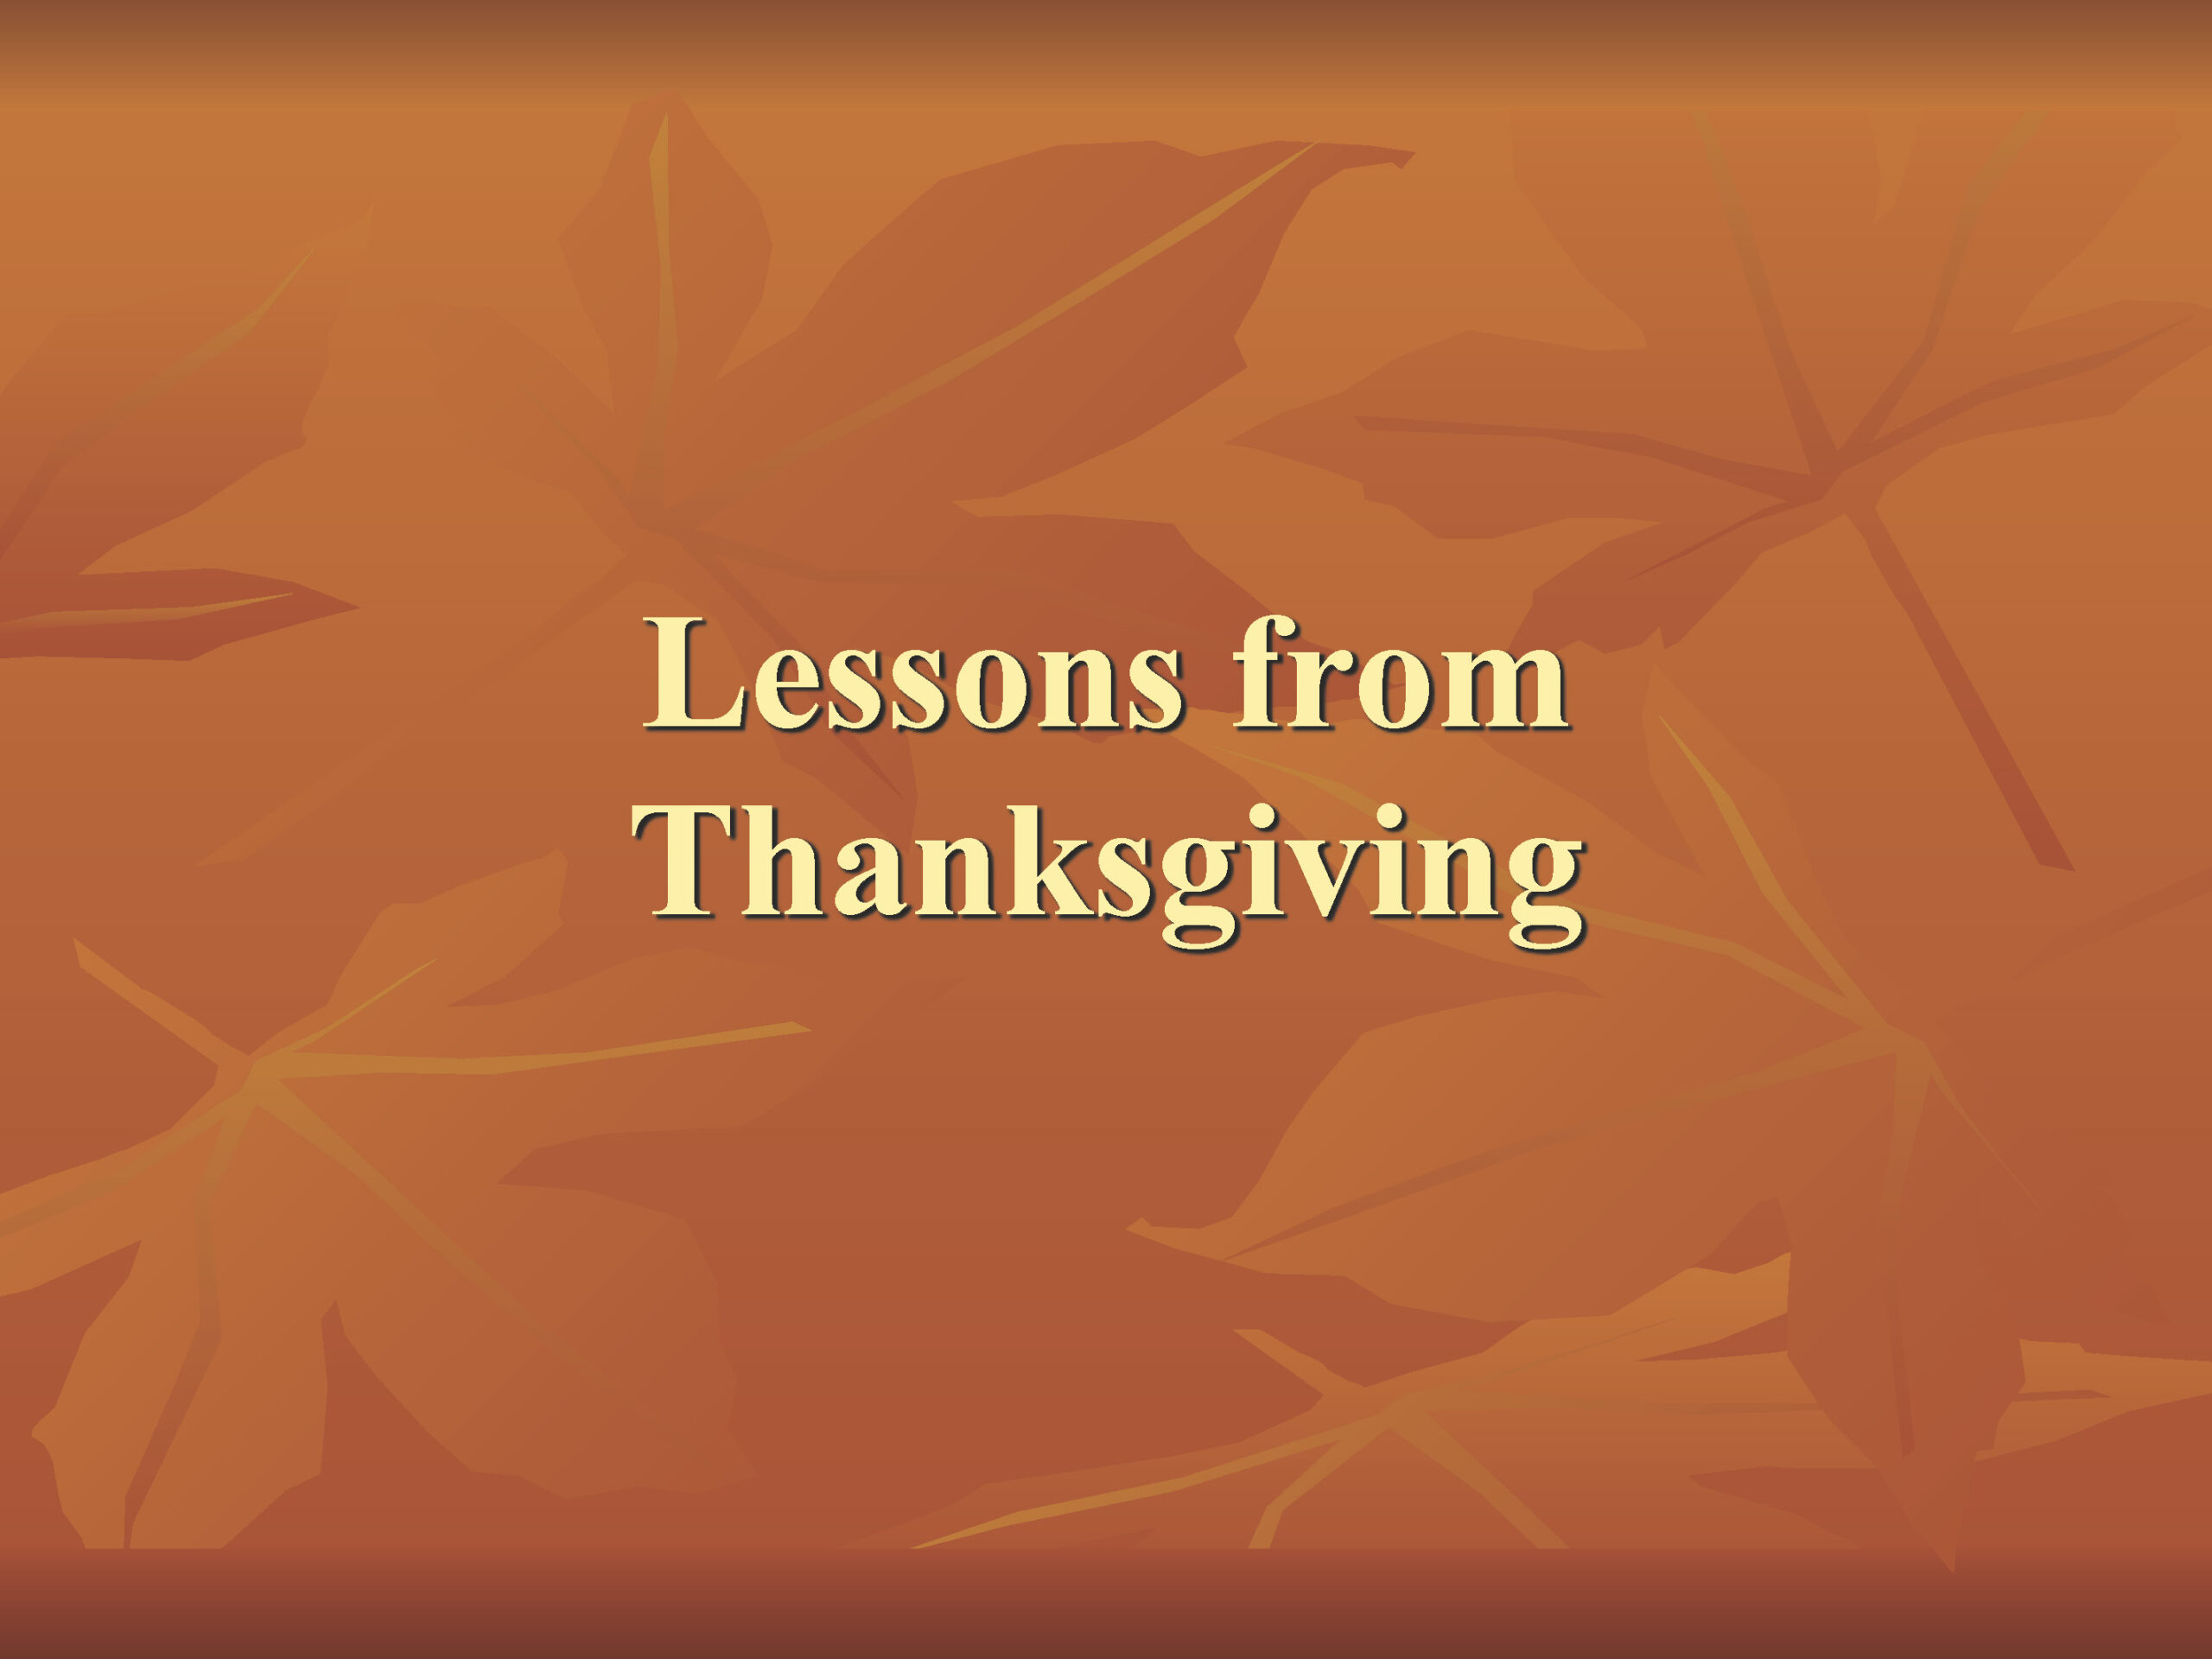 Lessons from Thanksgiving